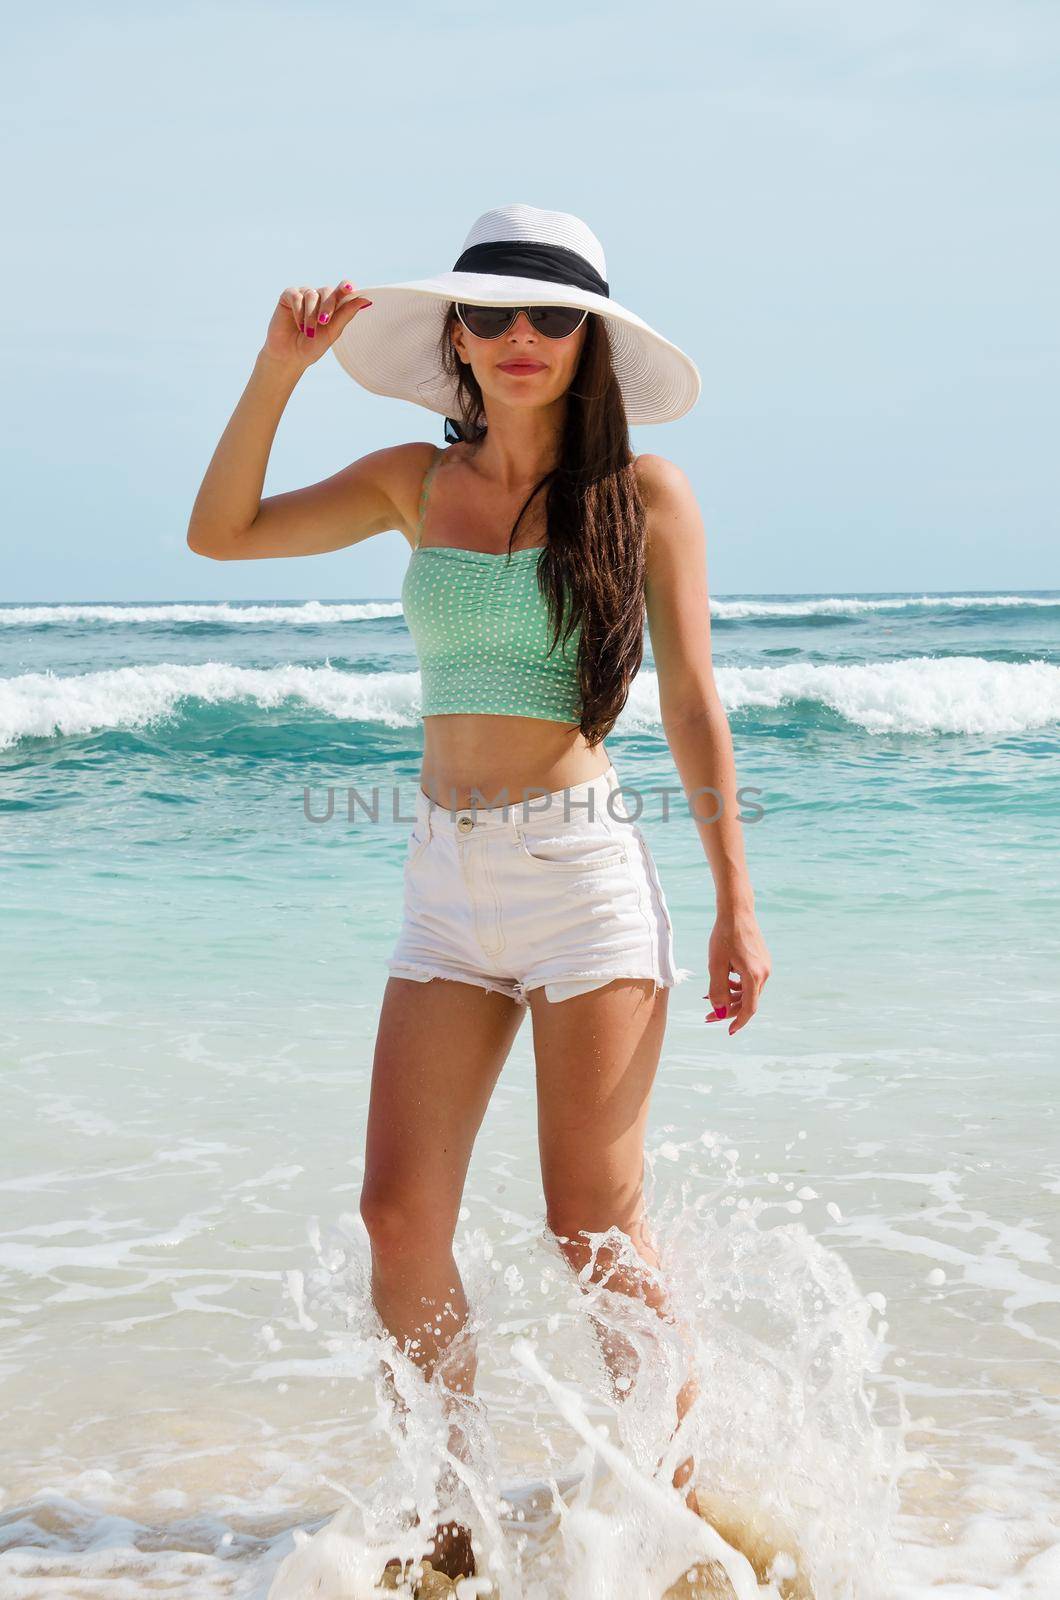 Young woman on beach - Stock image by Jyliana